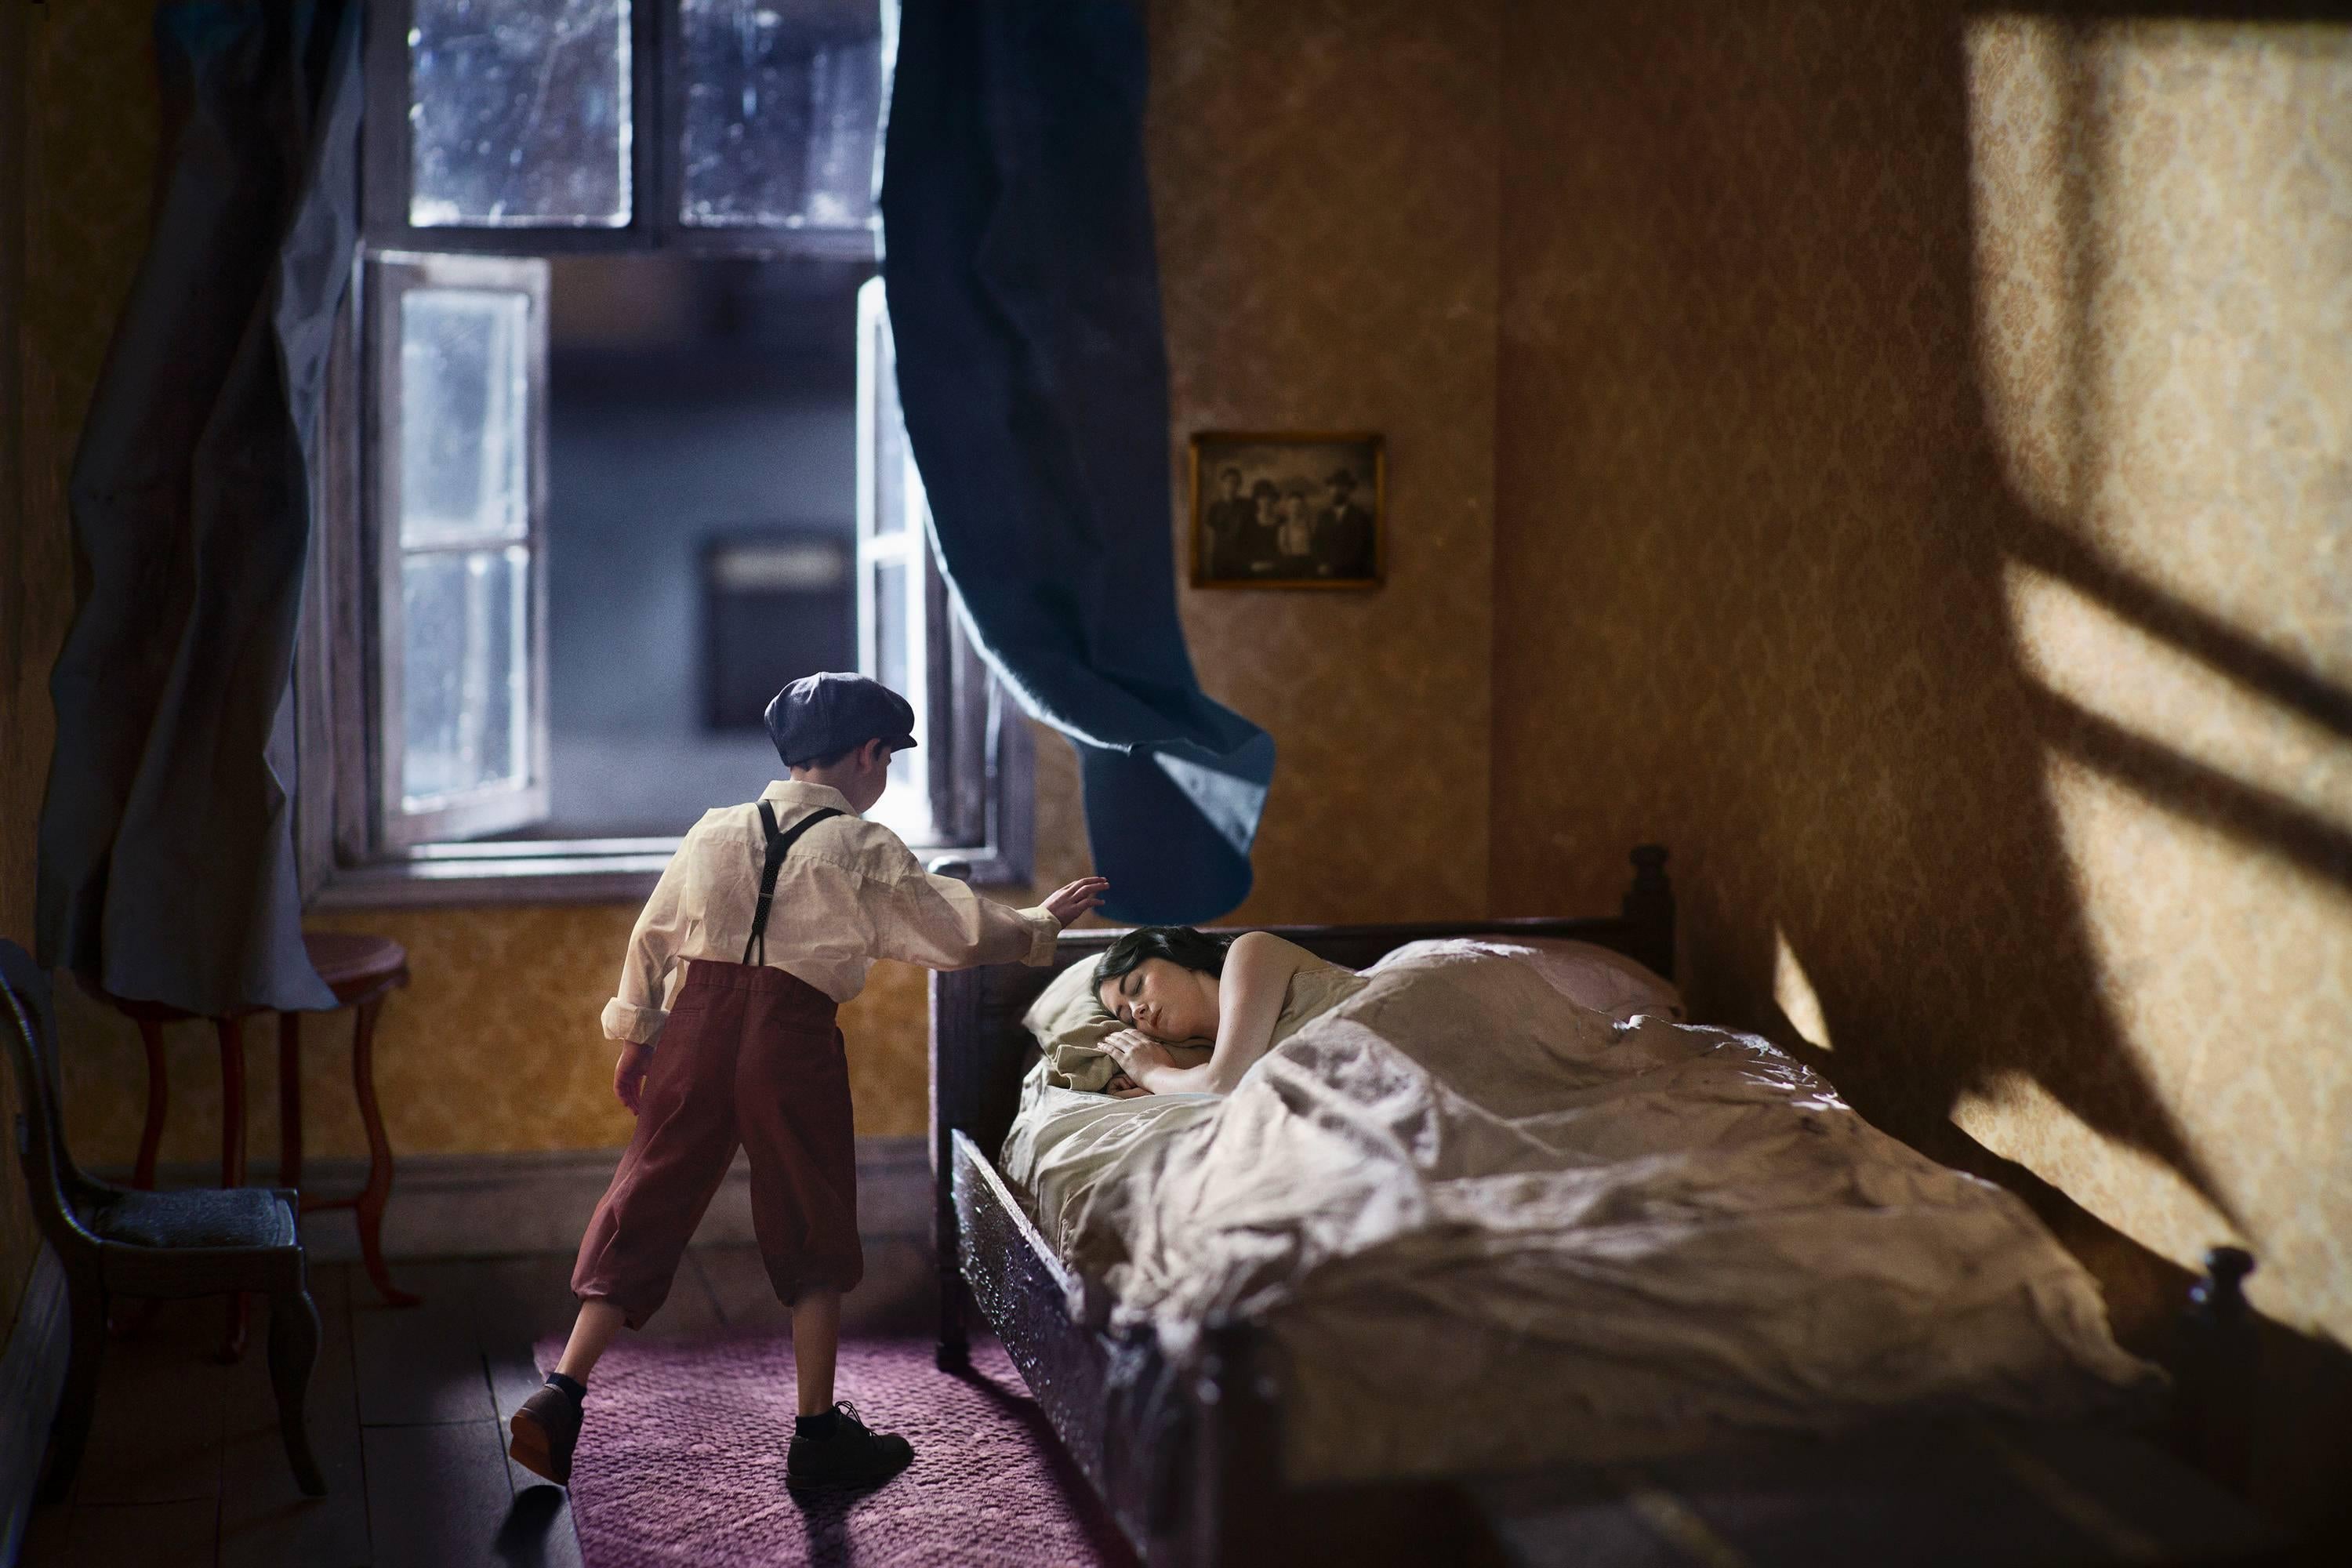 Richard Tuschman Color Photograph - The Dream, limited edition photograph, signed, archival pigment ink 